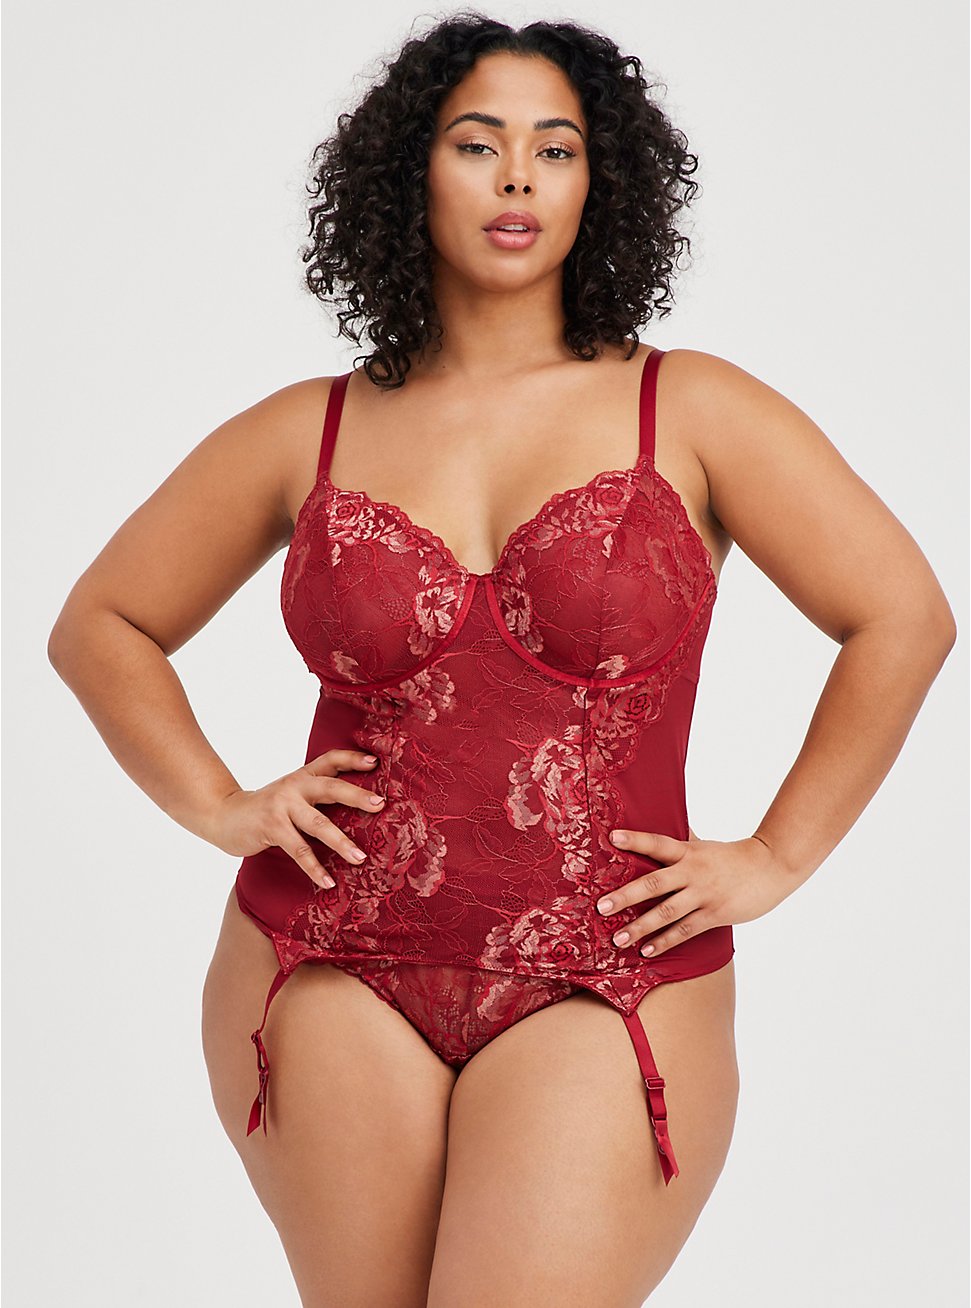 Underwire Bustier - Lace Red & Gold, BIKING RED, hi-res